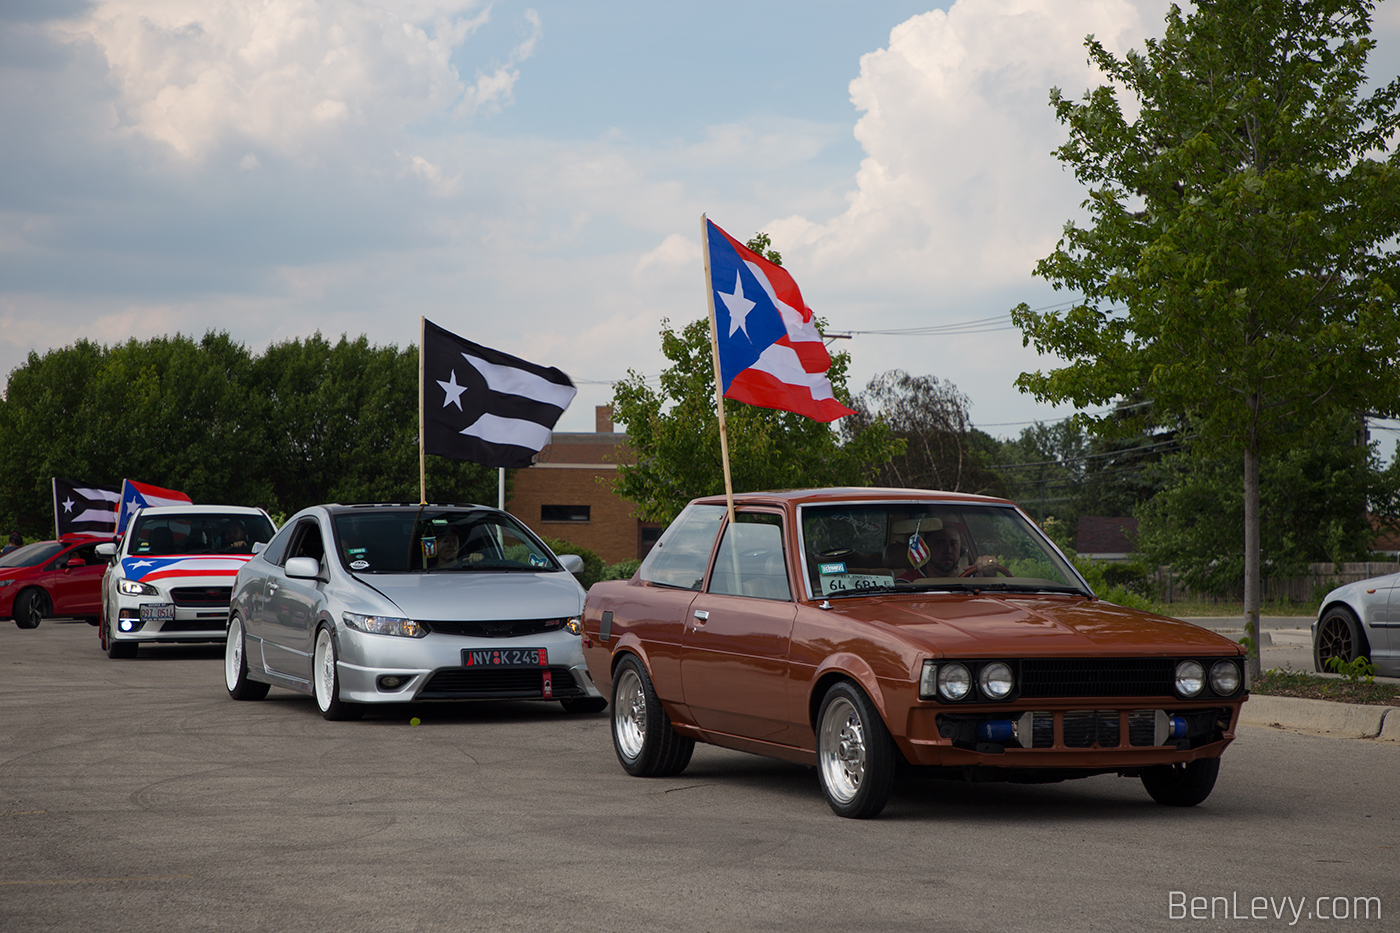 Puerto Rico Flags on Cars From Chicago